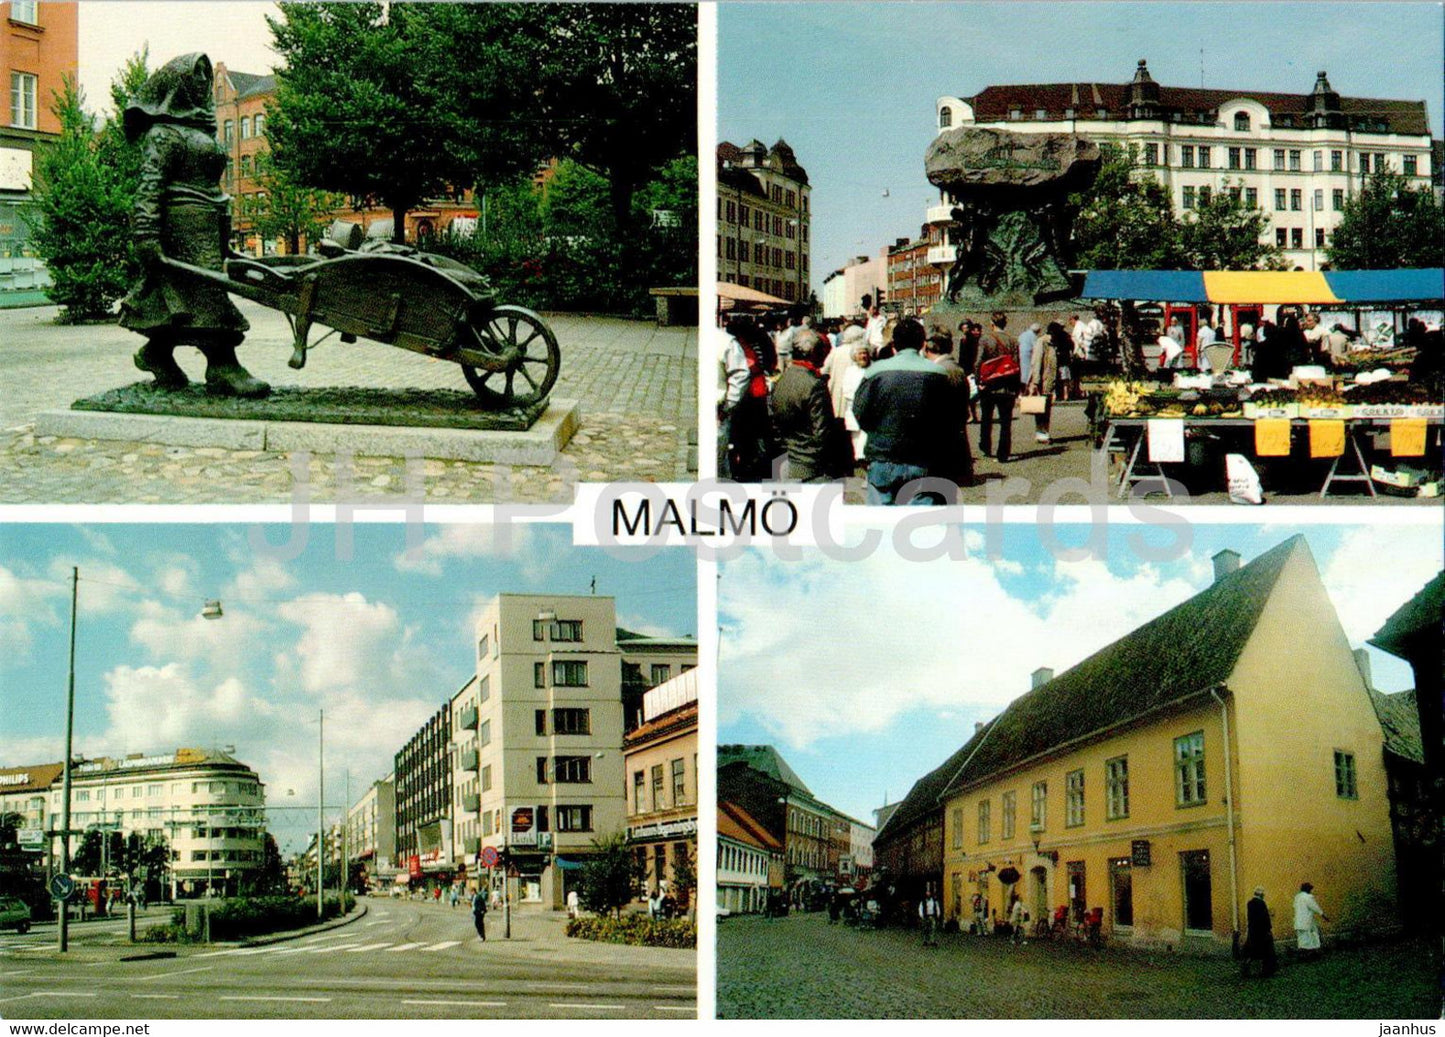 Malmo - multiview - 830 - Sweden - unused - JH Postcards